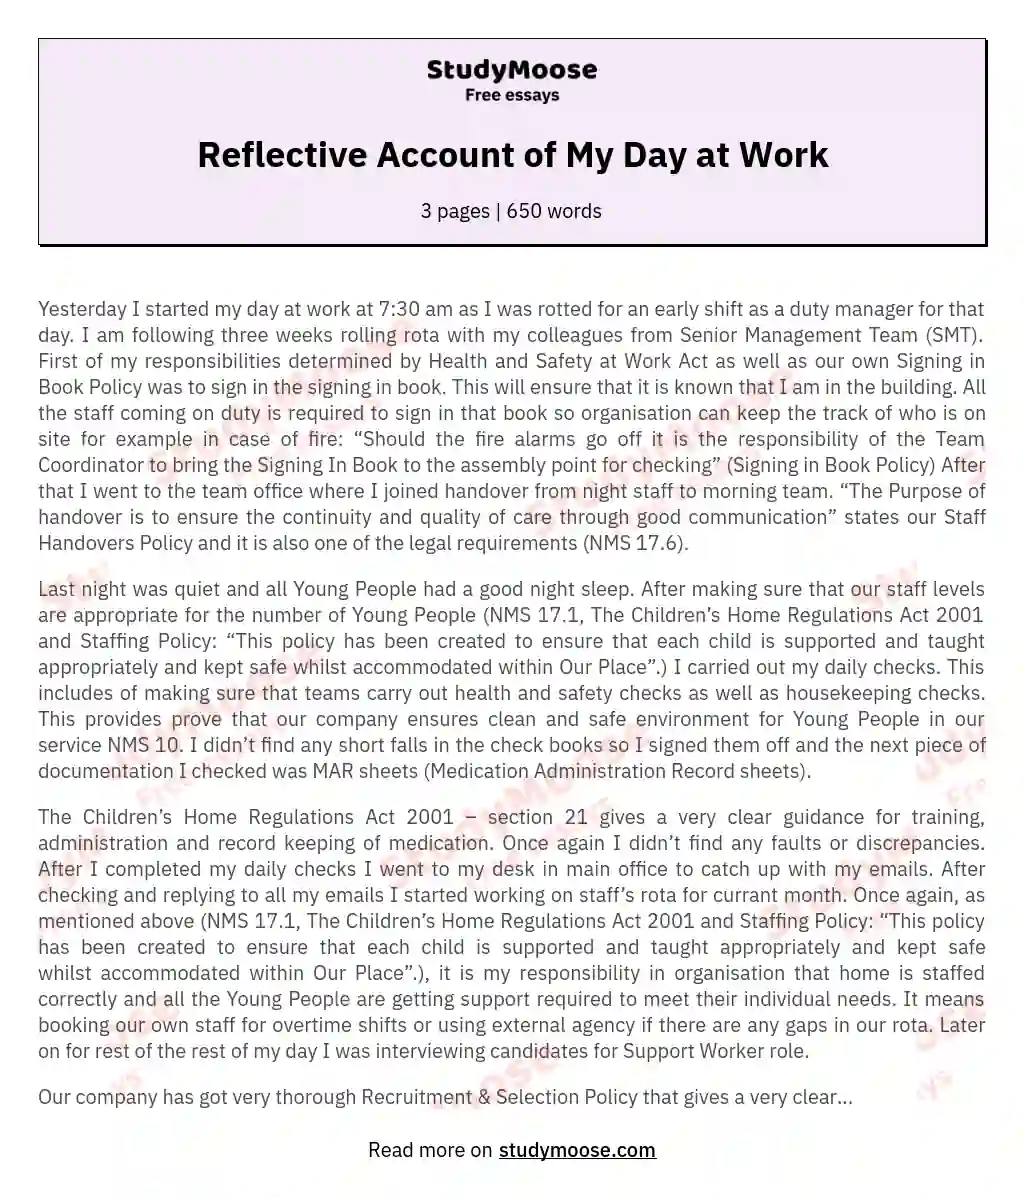 Reflective Account of My Day at Work essay